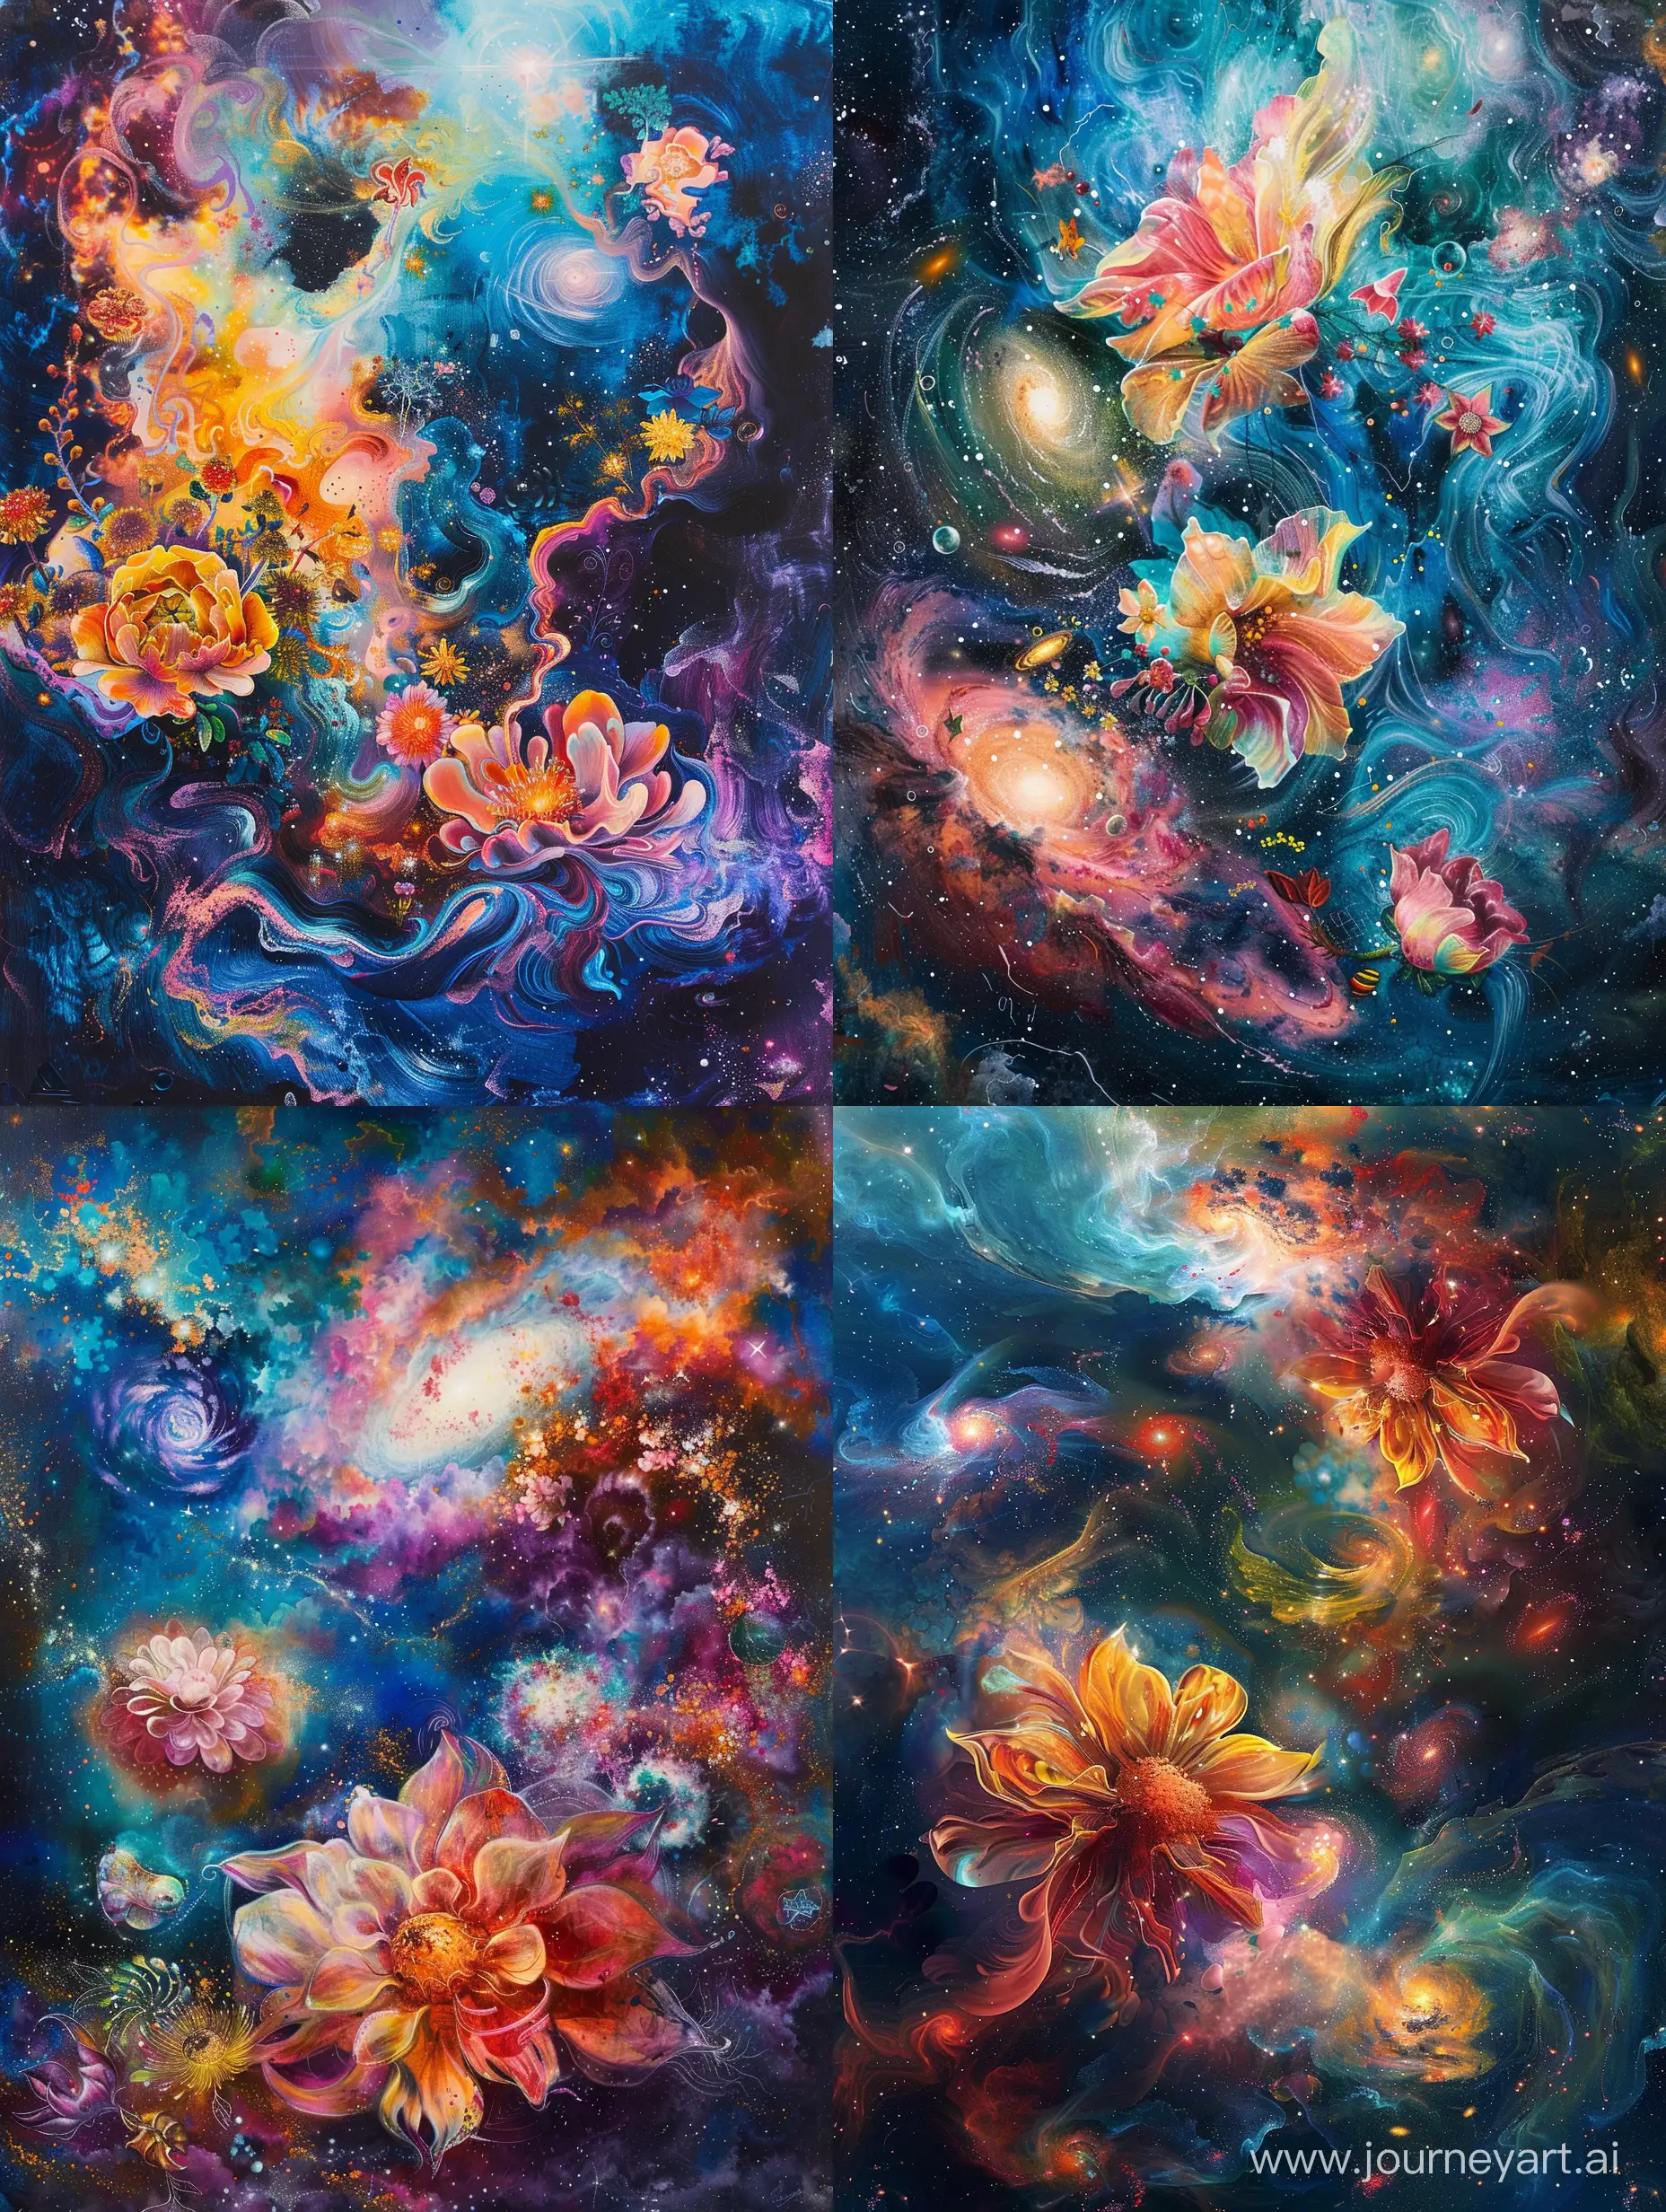 Delve into the mysteries of the cosmos with an abstract expressionist portrayal of celestial flowers blooming amidst swirling galaxies and cosmic nebulae, blending vibrant hues and ethereal forms to evoke a sense of awe and wonder.